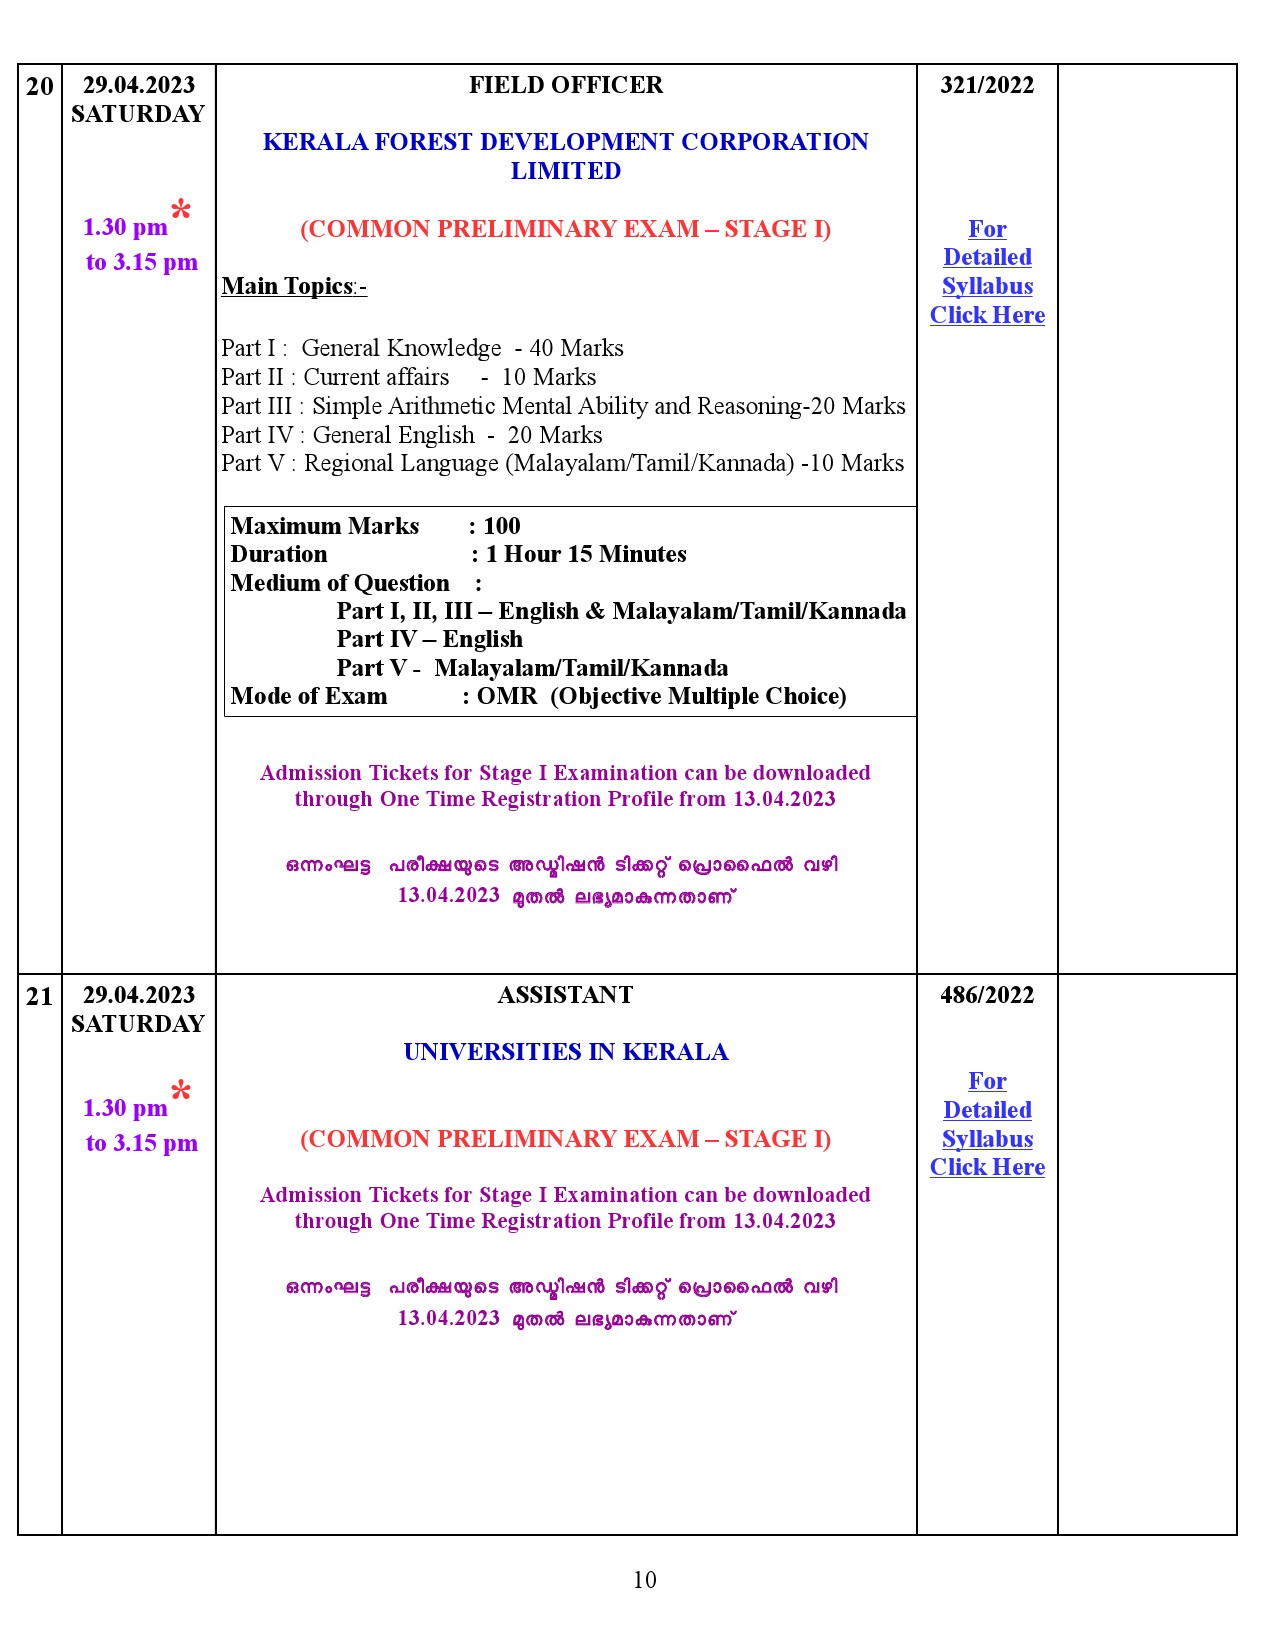 Examination Programme For The Month Of April 2023 - Notification Image 10